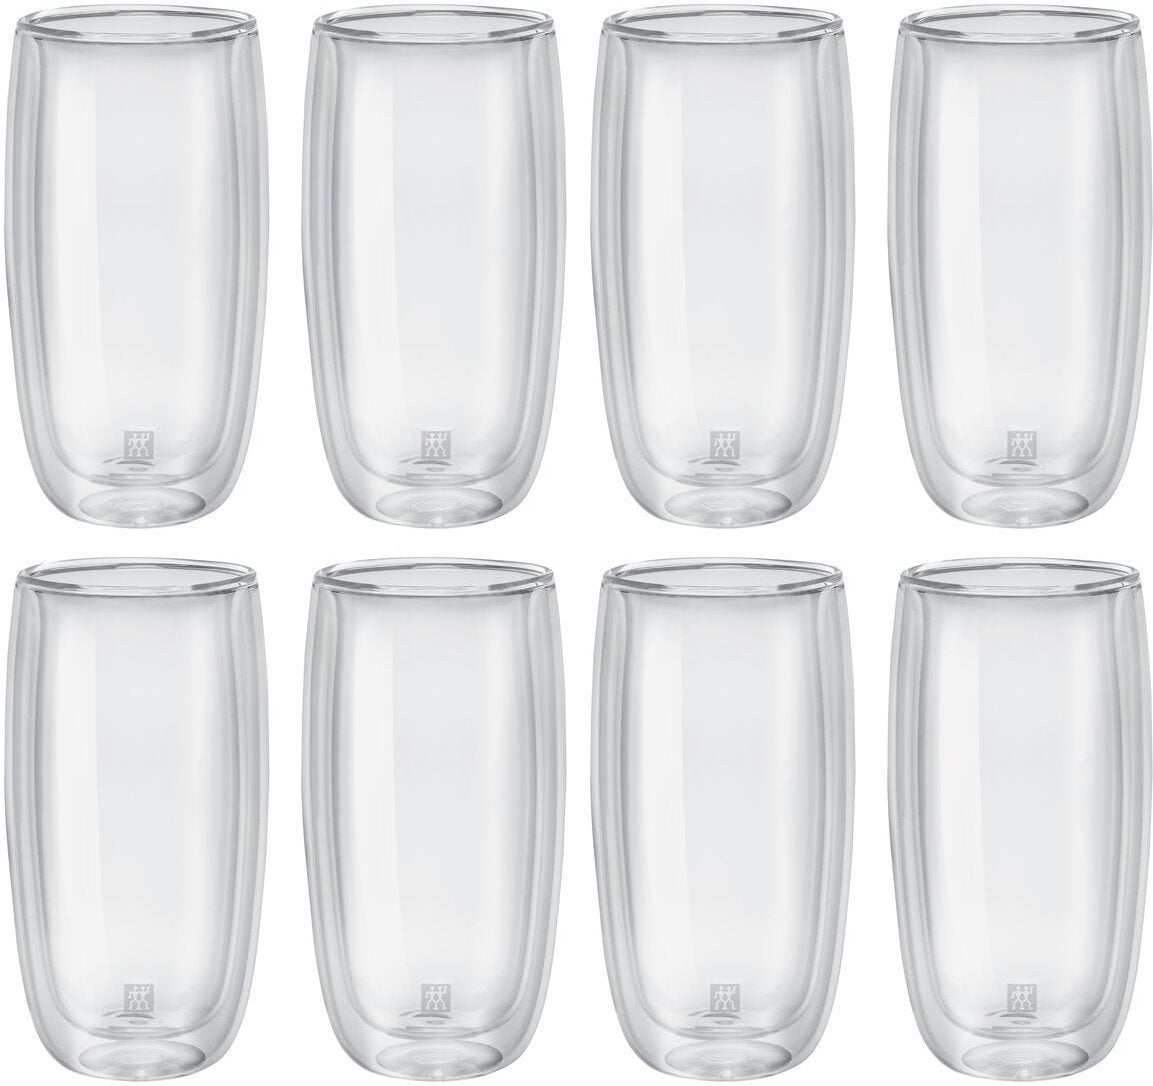 Zwilling - Sorrento 8 PC Double-Wall Soft Drink Set - 39500-103